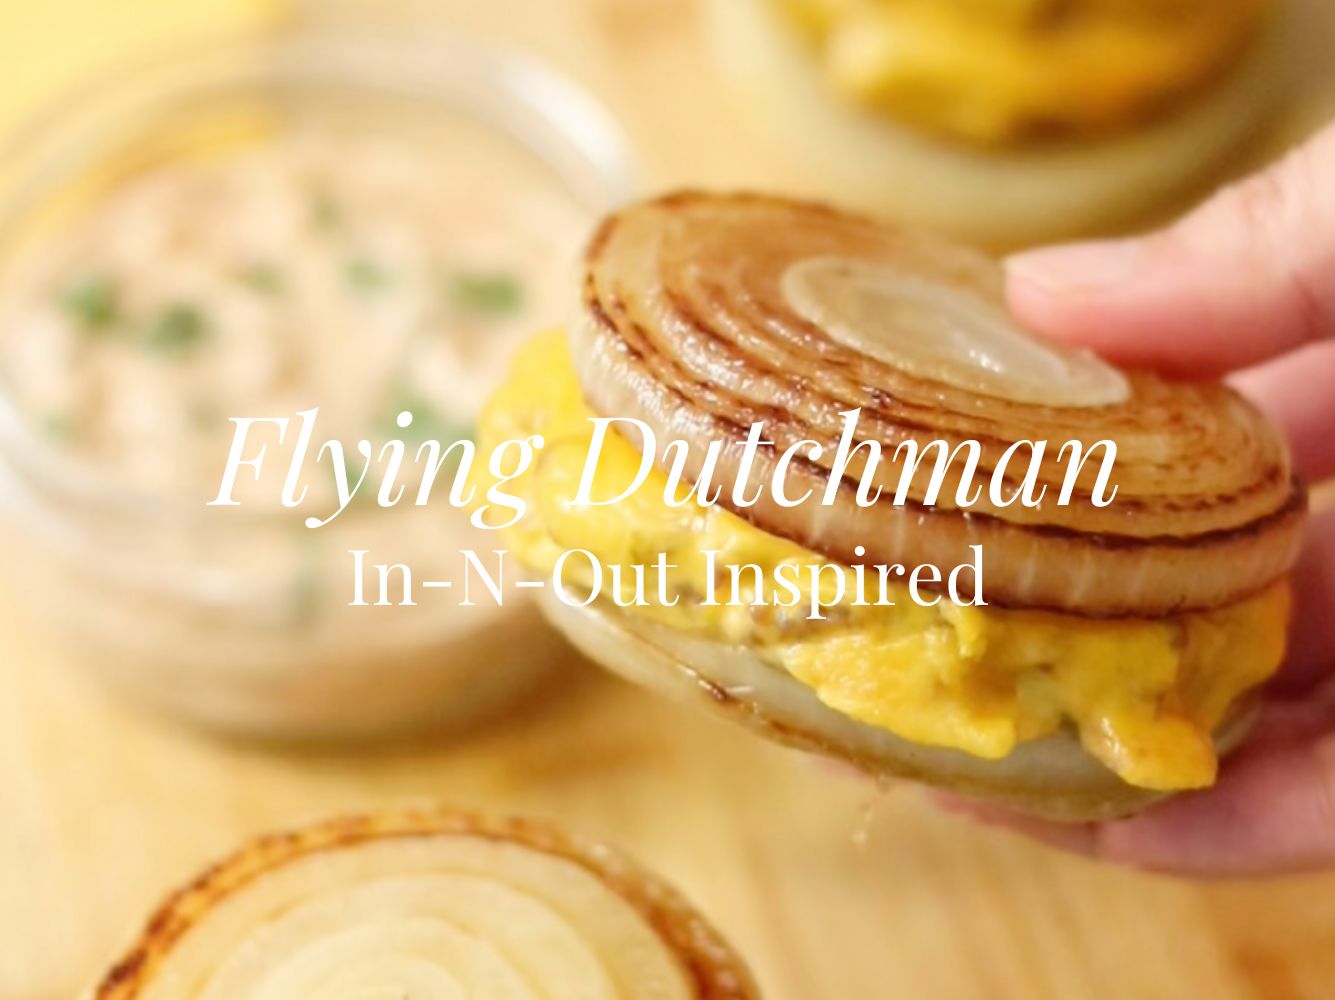 In-N-Out Inspired Flying Dutchman